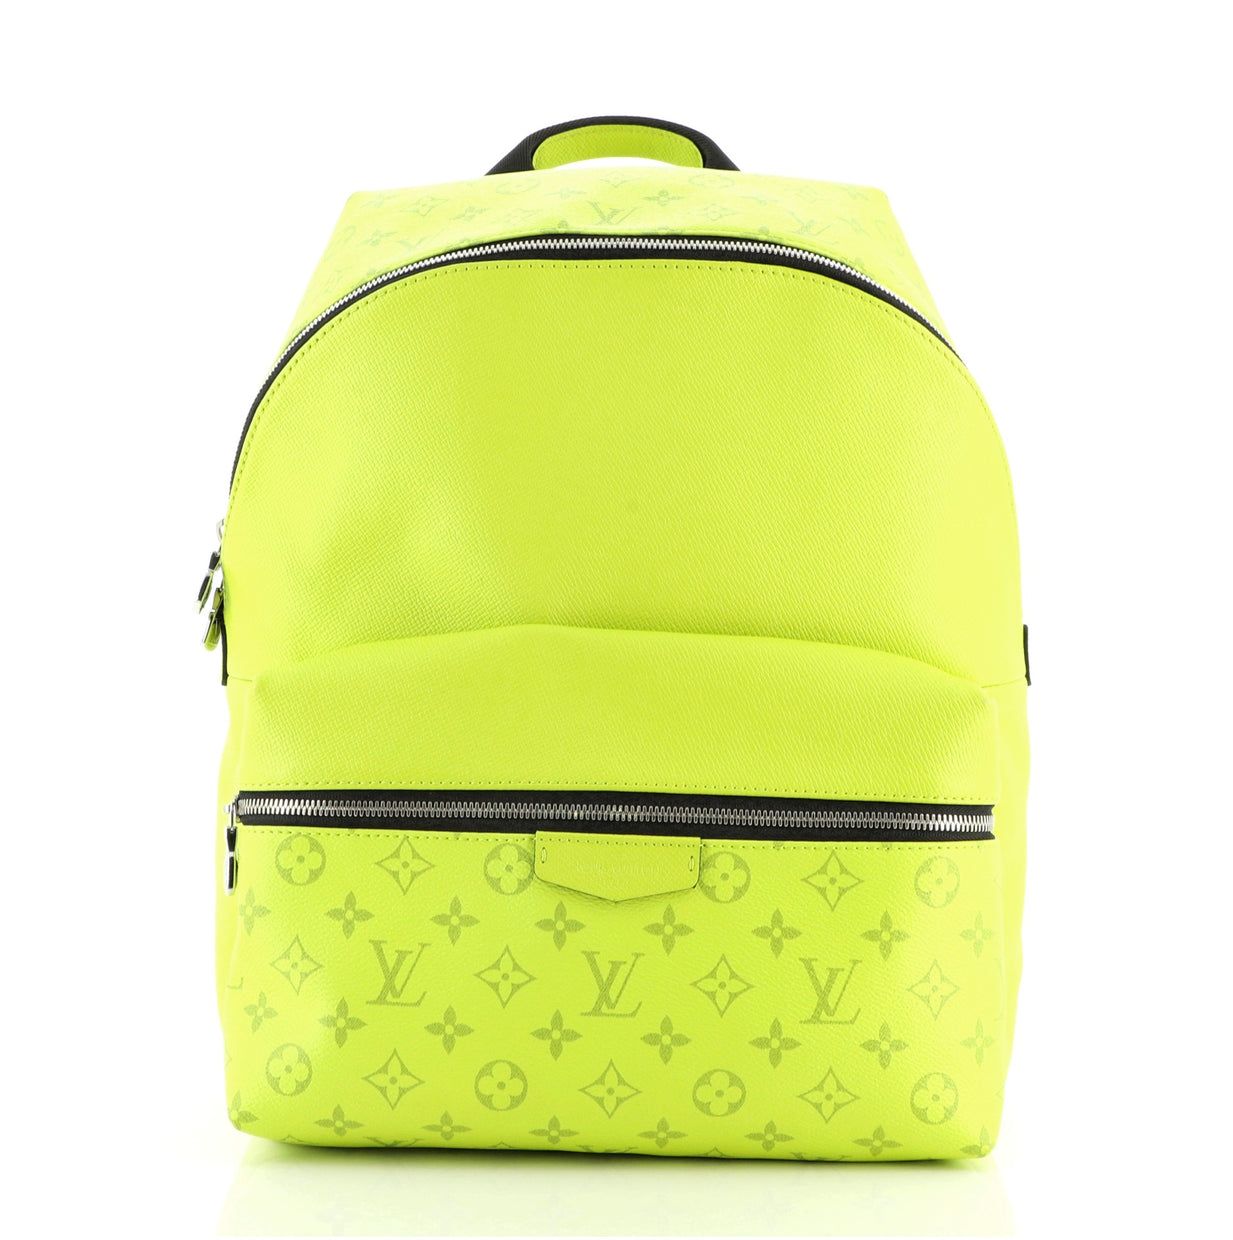 Louis+Vuitton+Discovery+Backpack+PM+Green+Lime+Monogram+Taigarama+Leather  for sale online